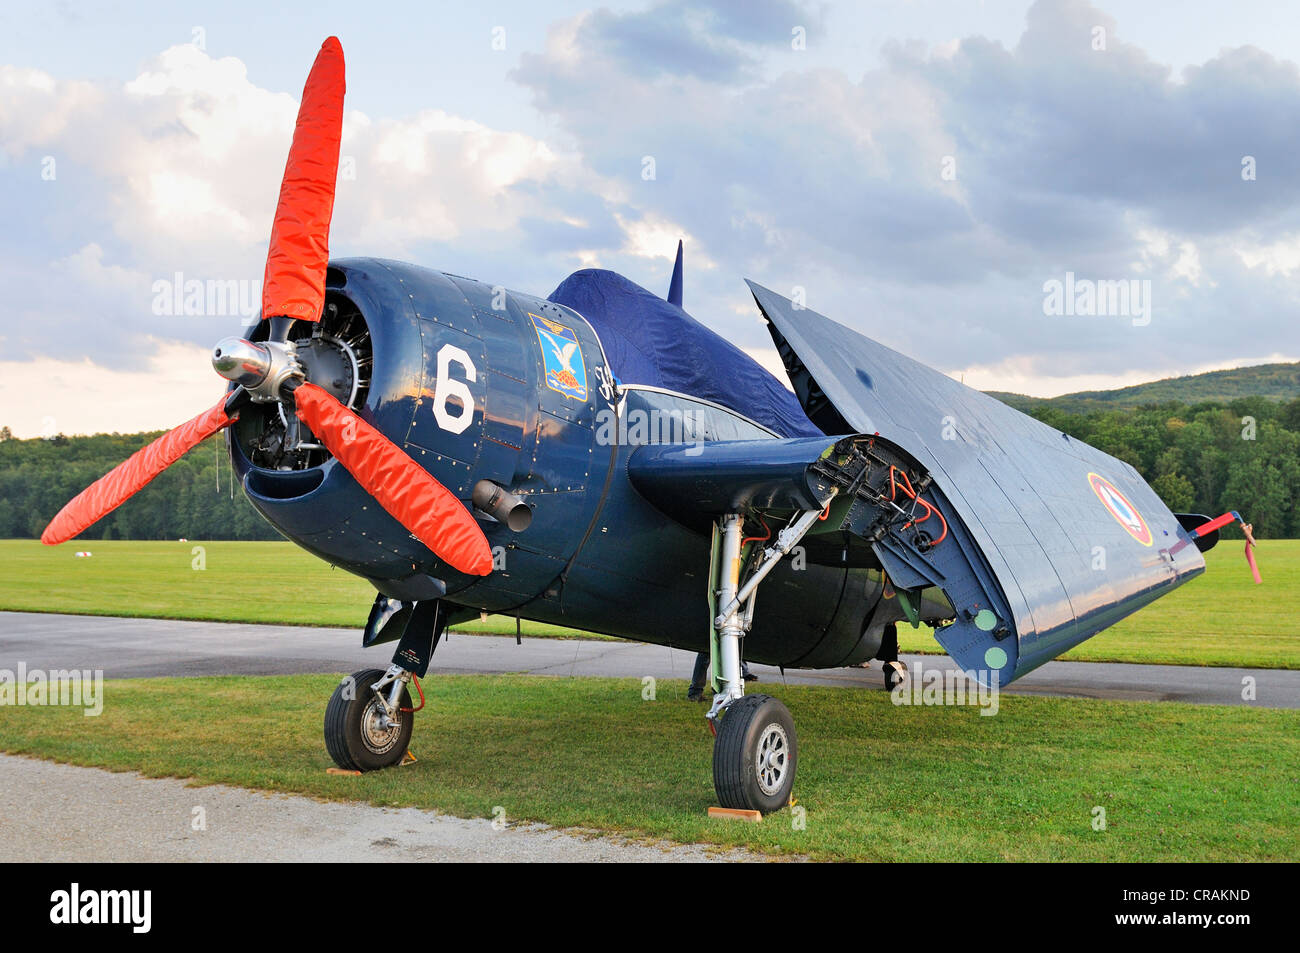 U.S. Navy Grumman TBF Avenger torpedo bombers in park position, Europe's largest meeting of vintage aircraft at Hahnweide Stock Photo